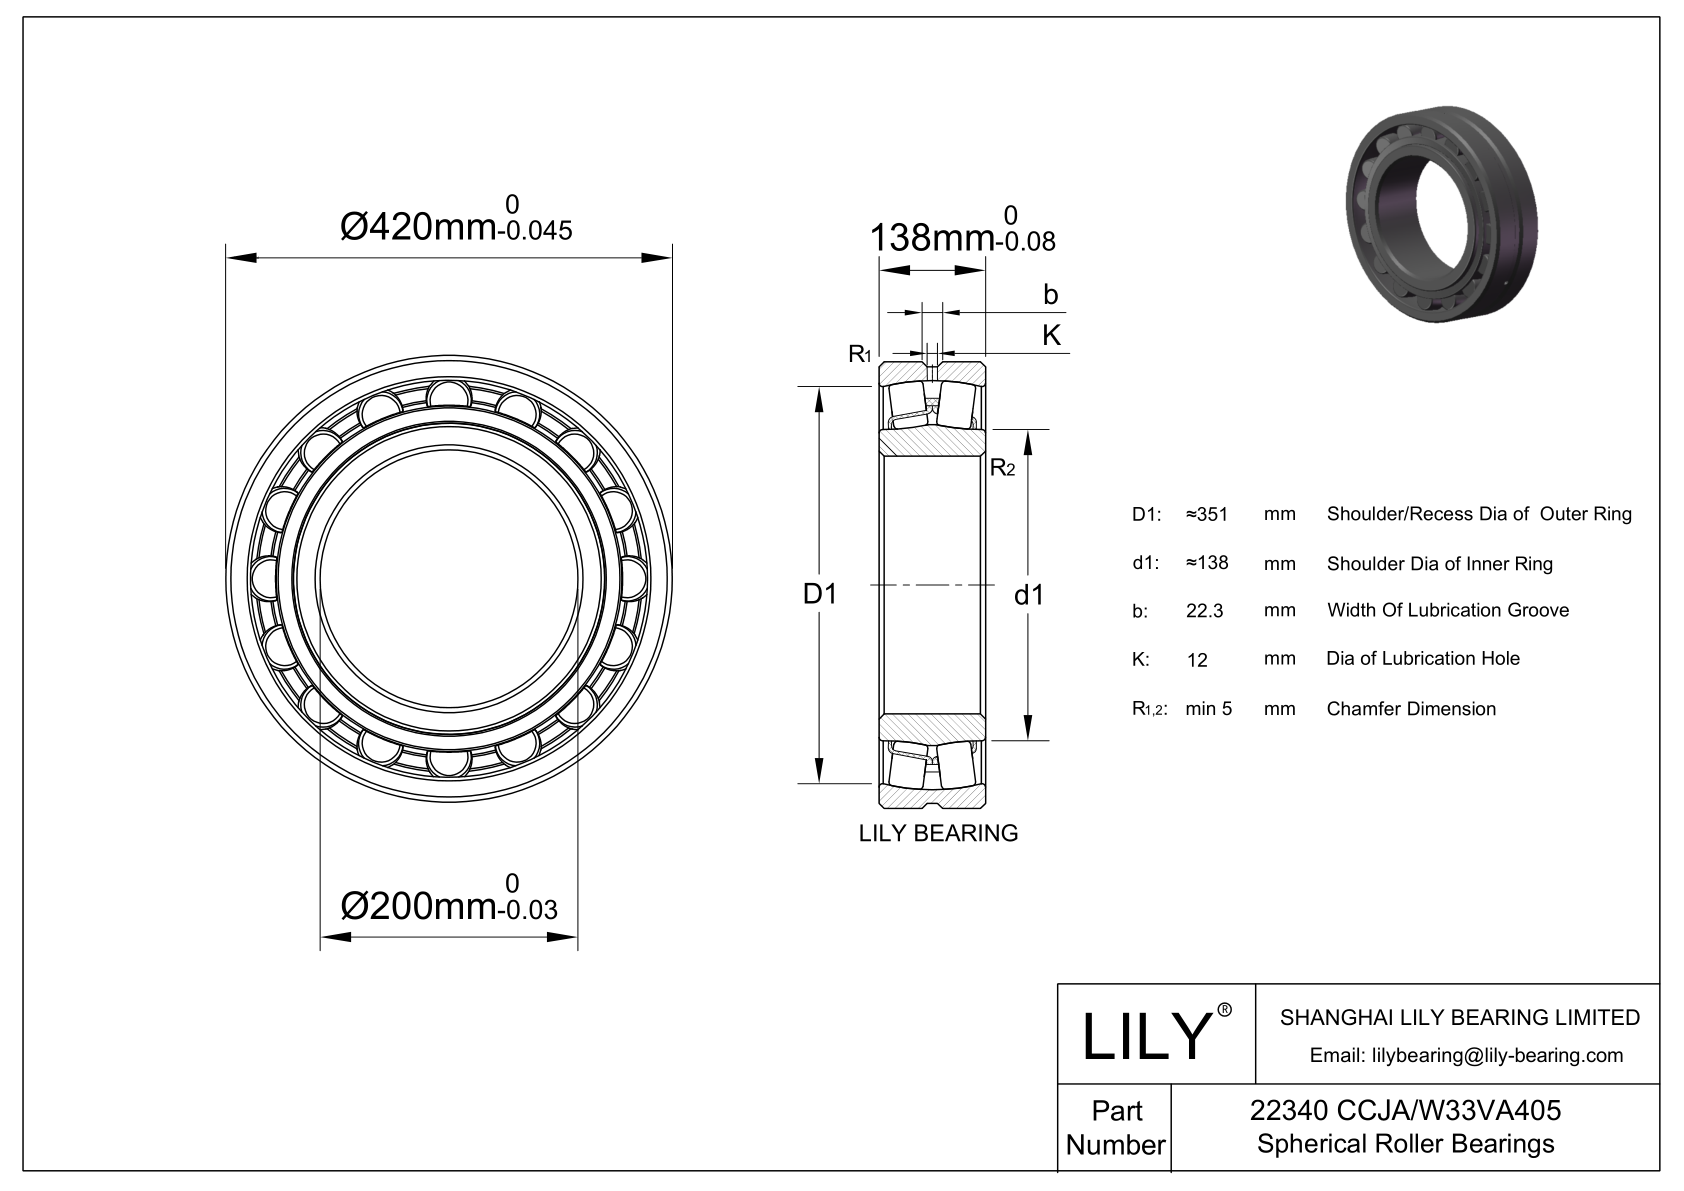 22340 CCJA/W33VA405 Double Row Spherical Roller Bearing cad drawing